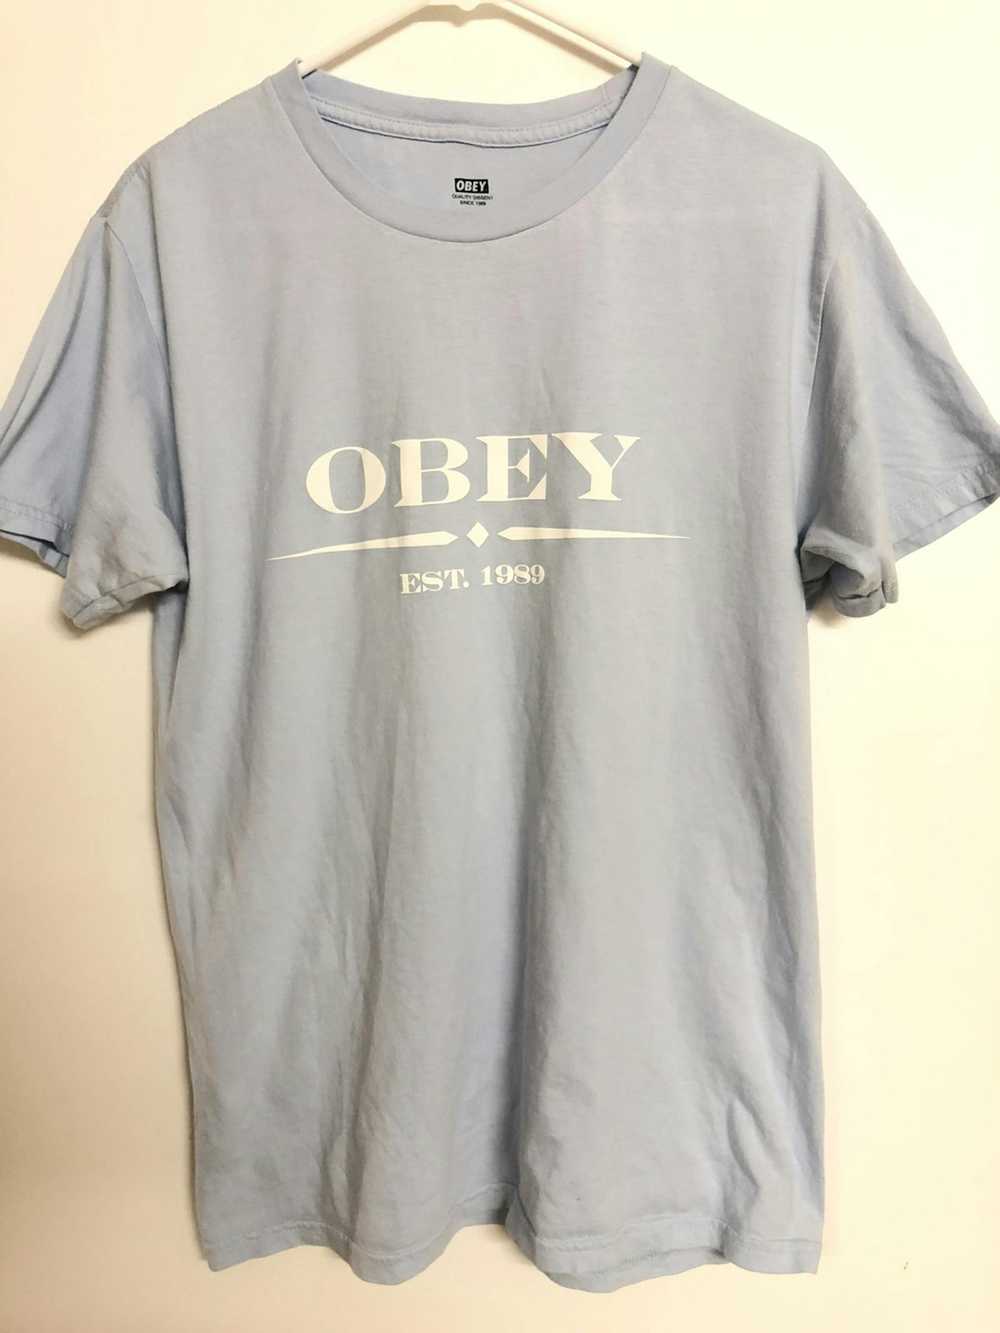 Obey Obey Shirt - image 1